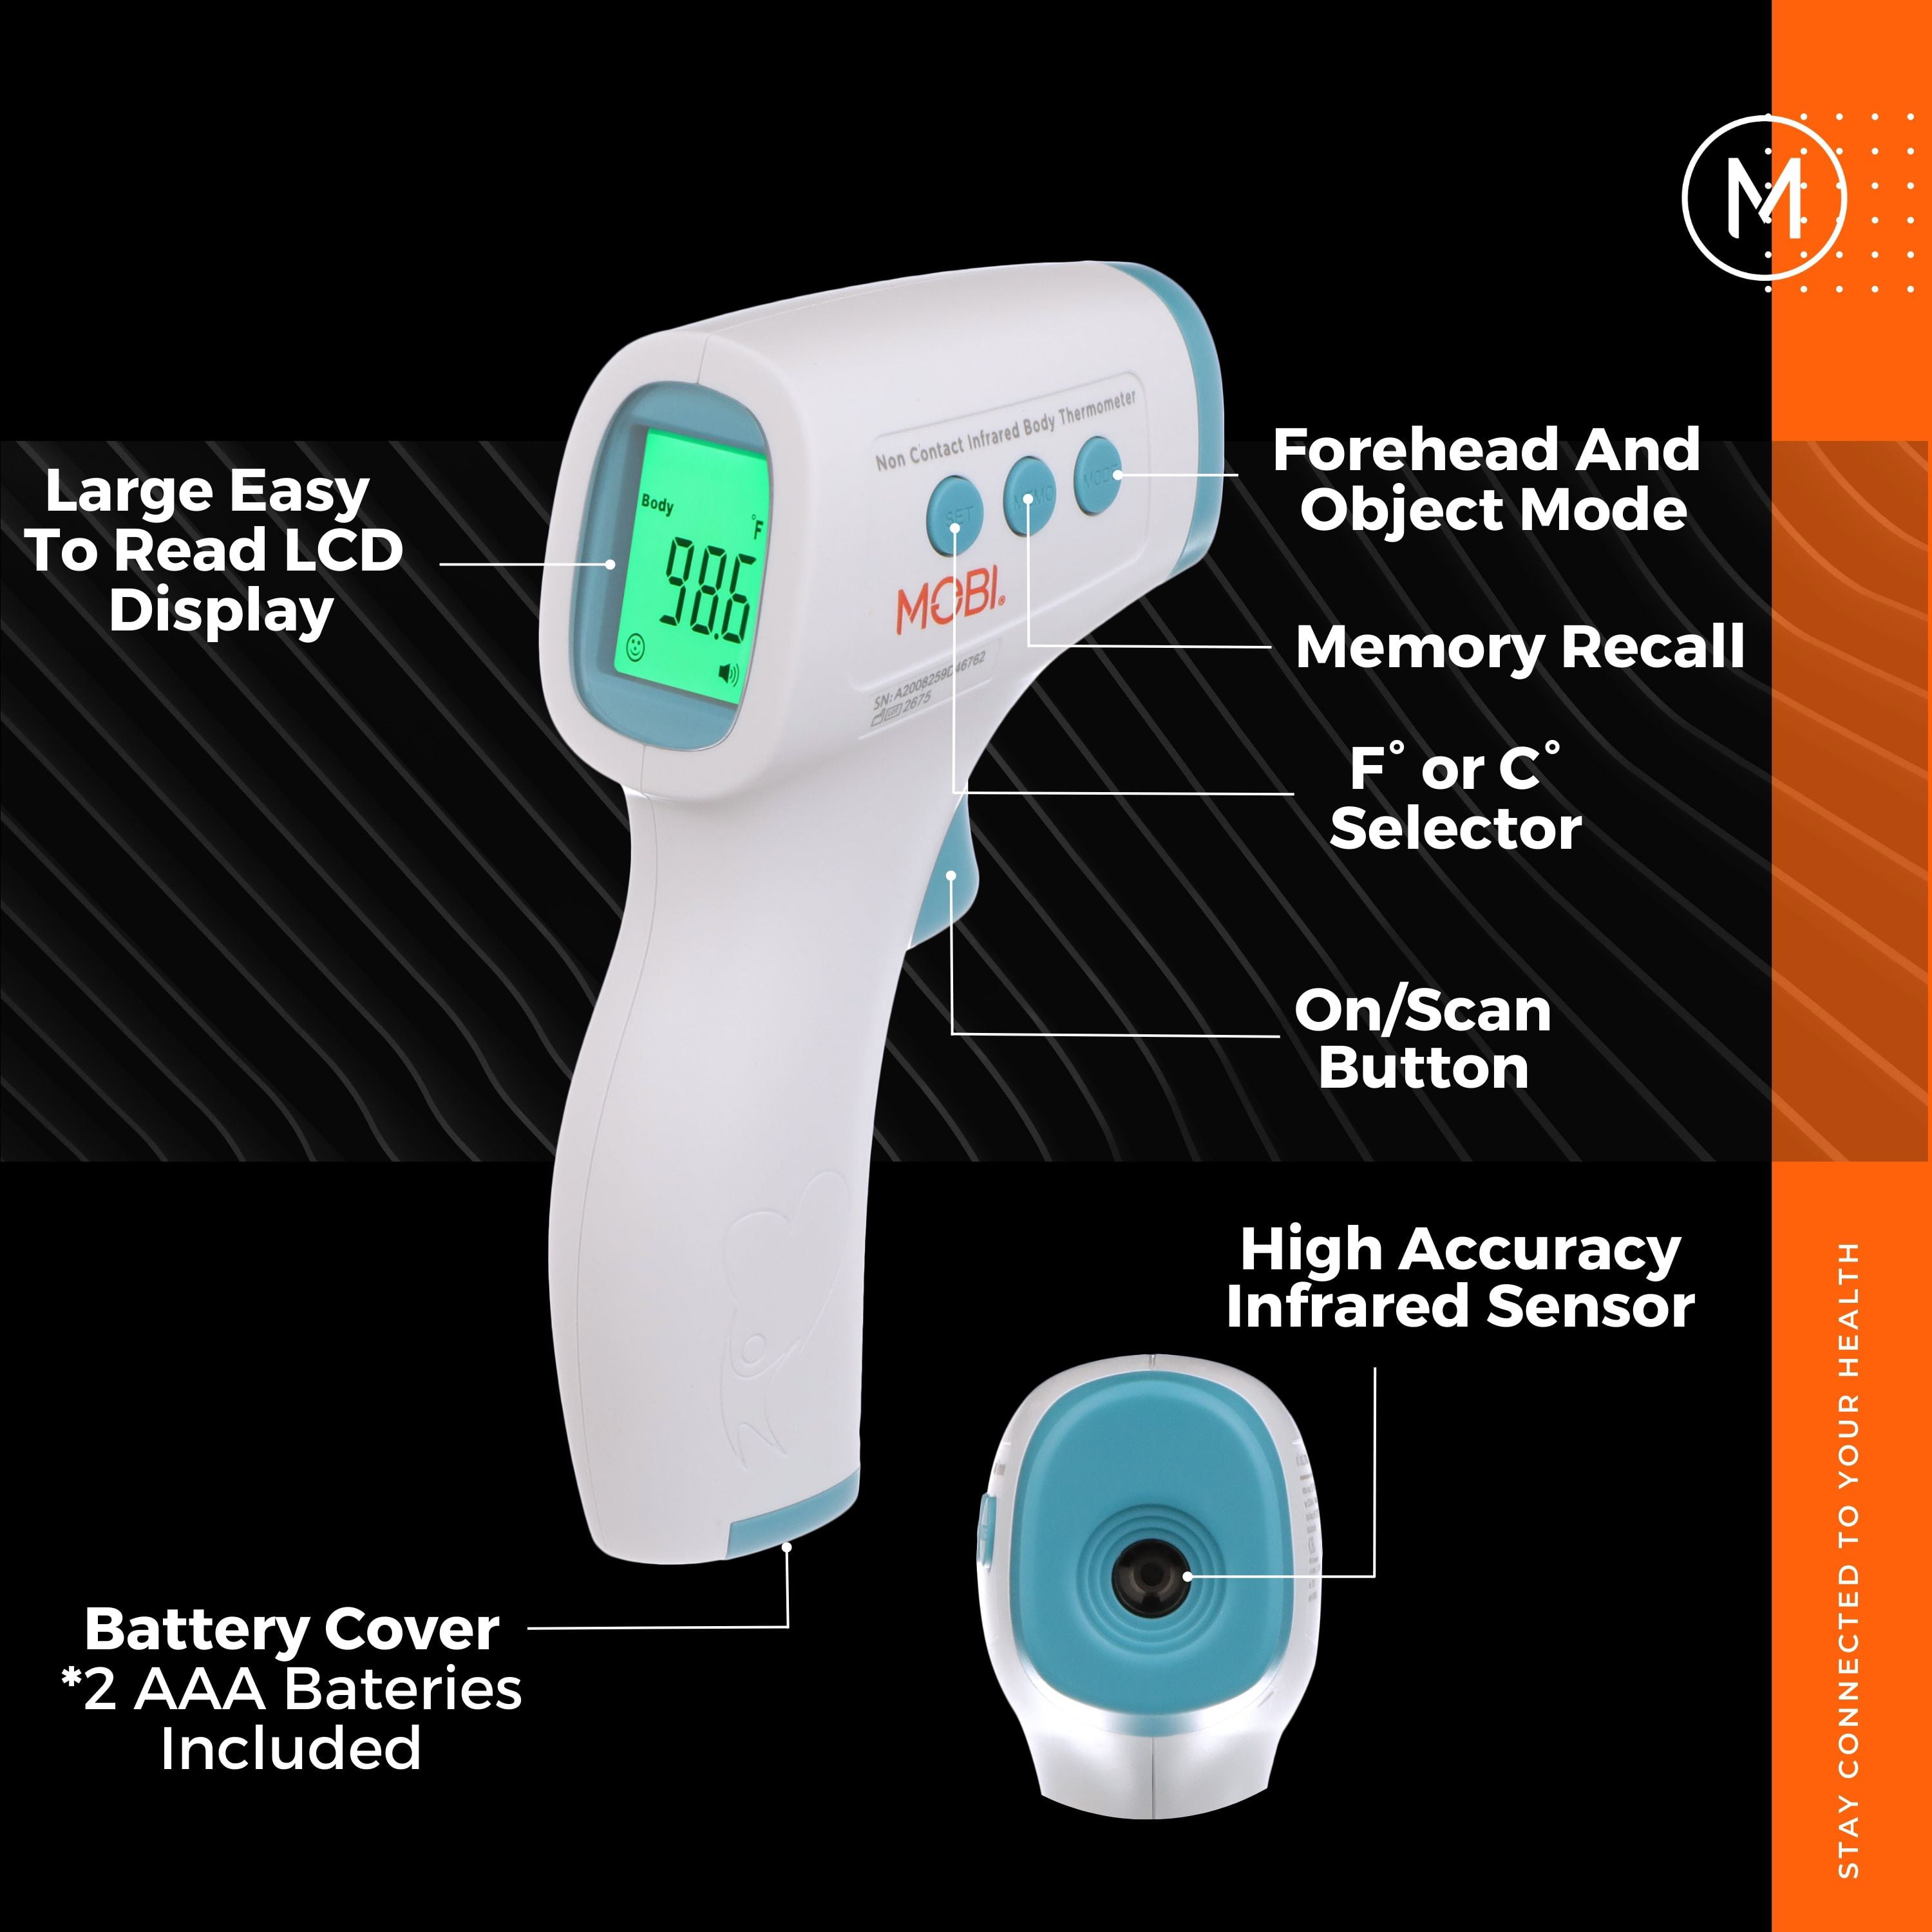 Non-Contact Infrared Forehead Thermometer with Fever Indicators